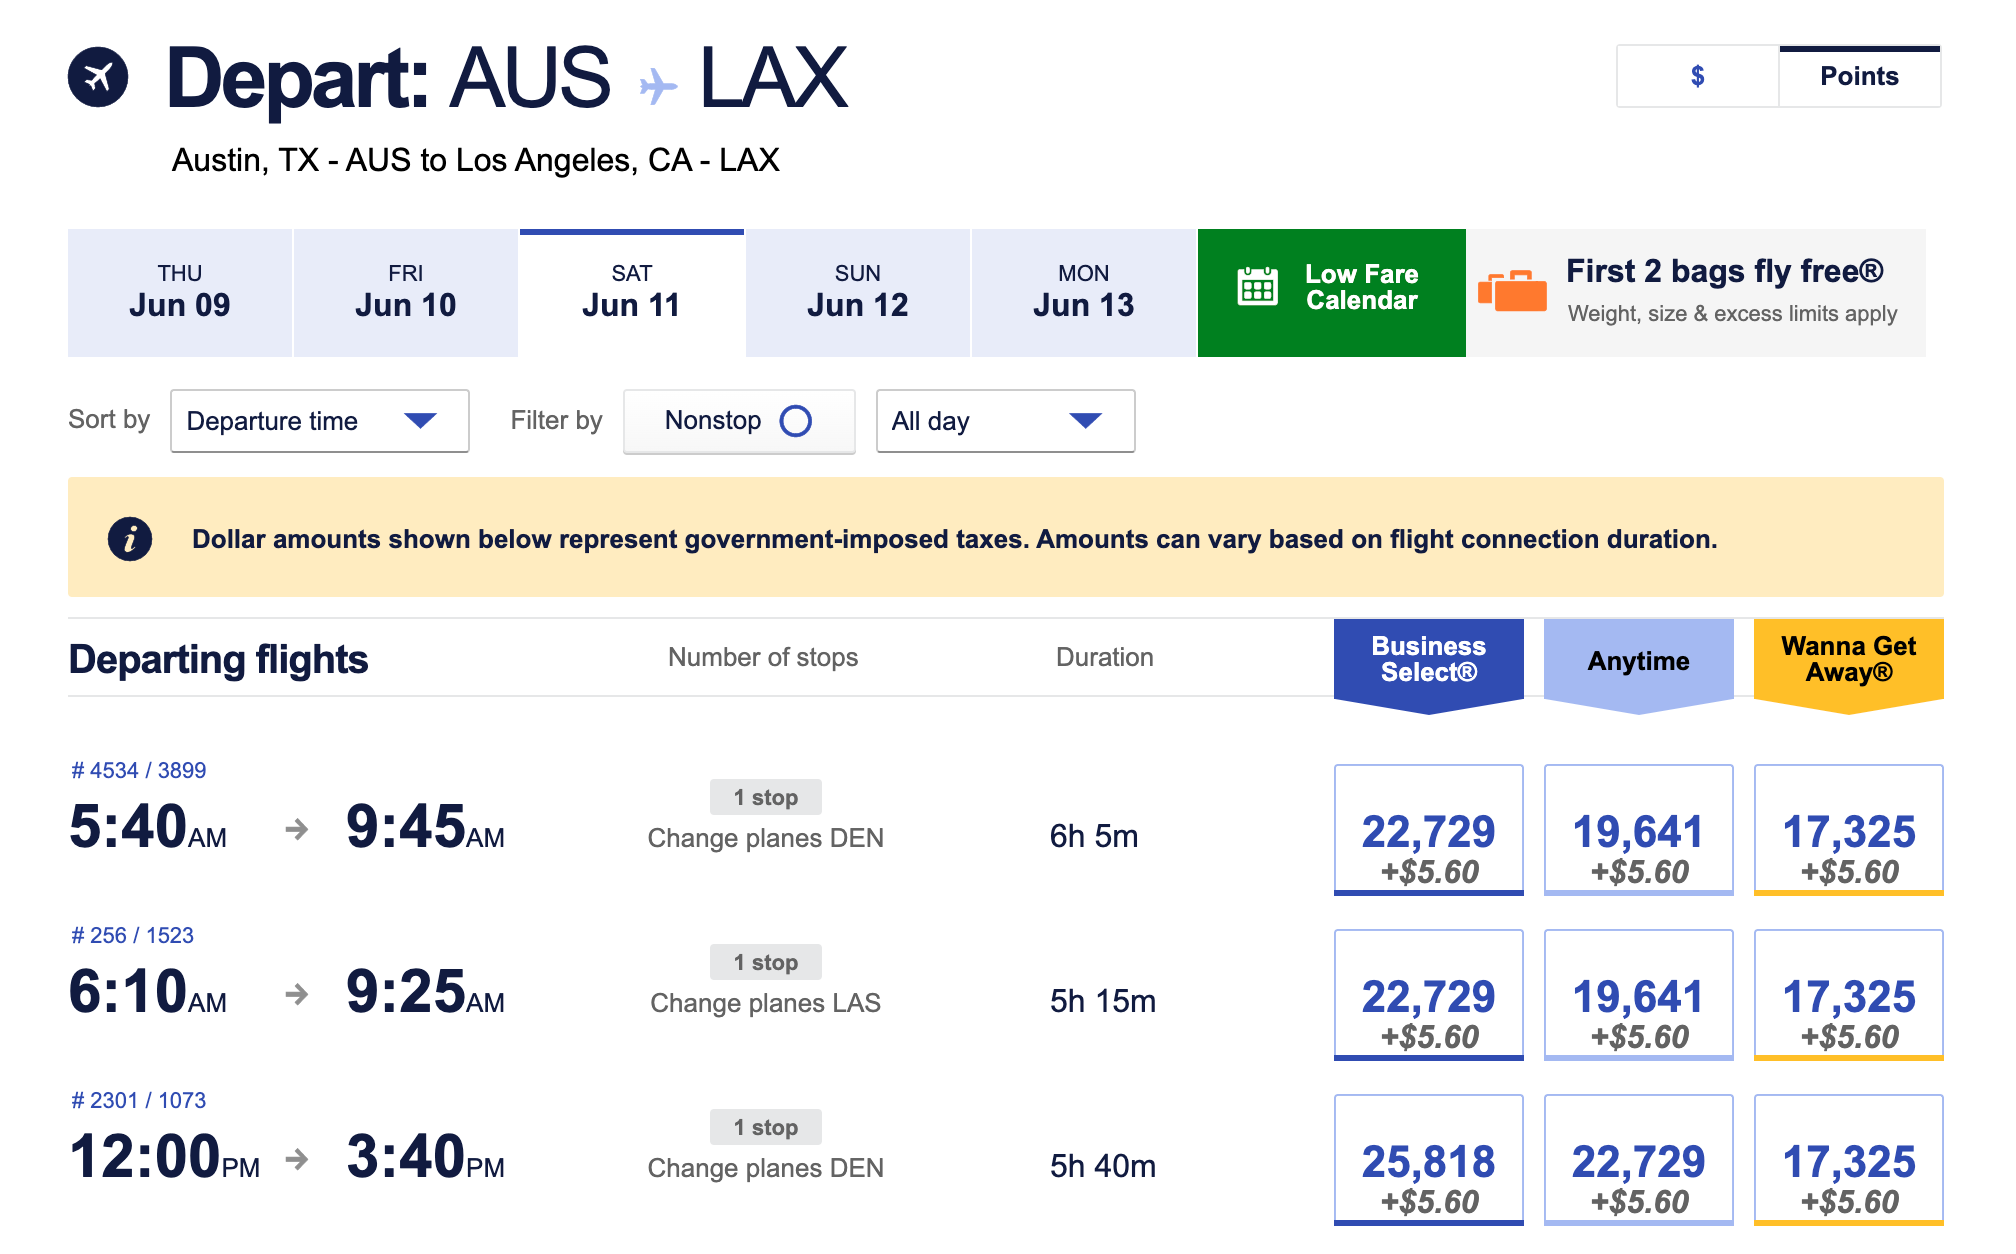 One-way Southwest award flights from Austin to Los Angeles on Saturday June 11, 2022